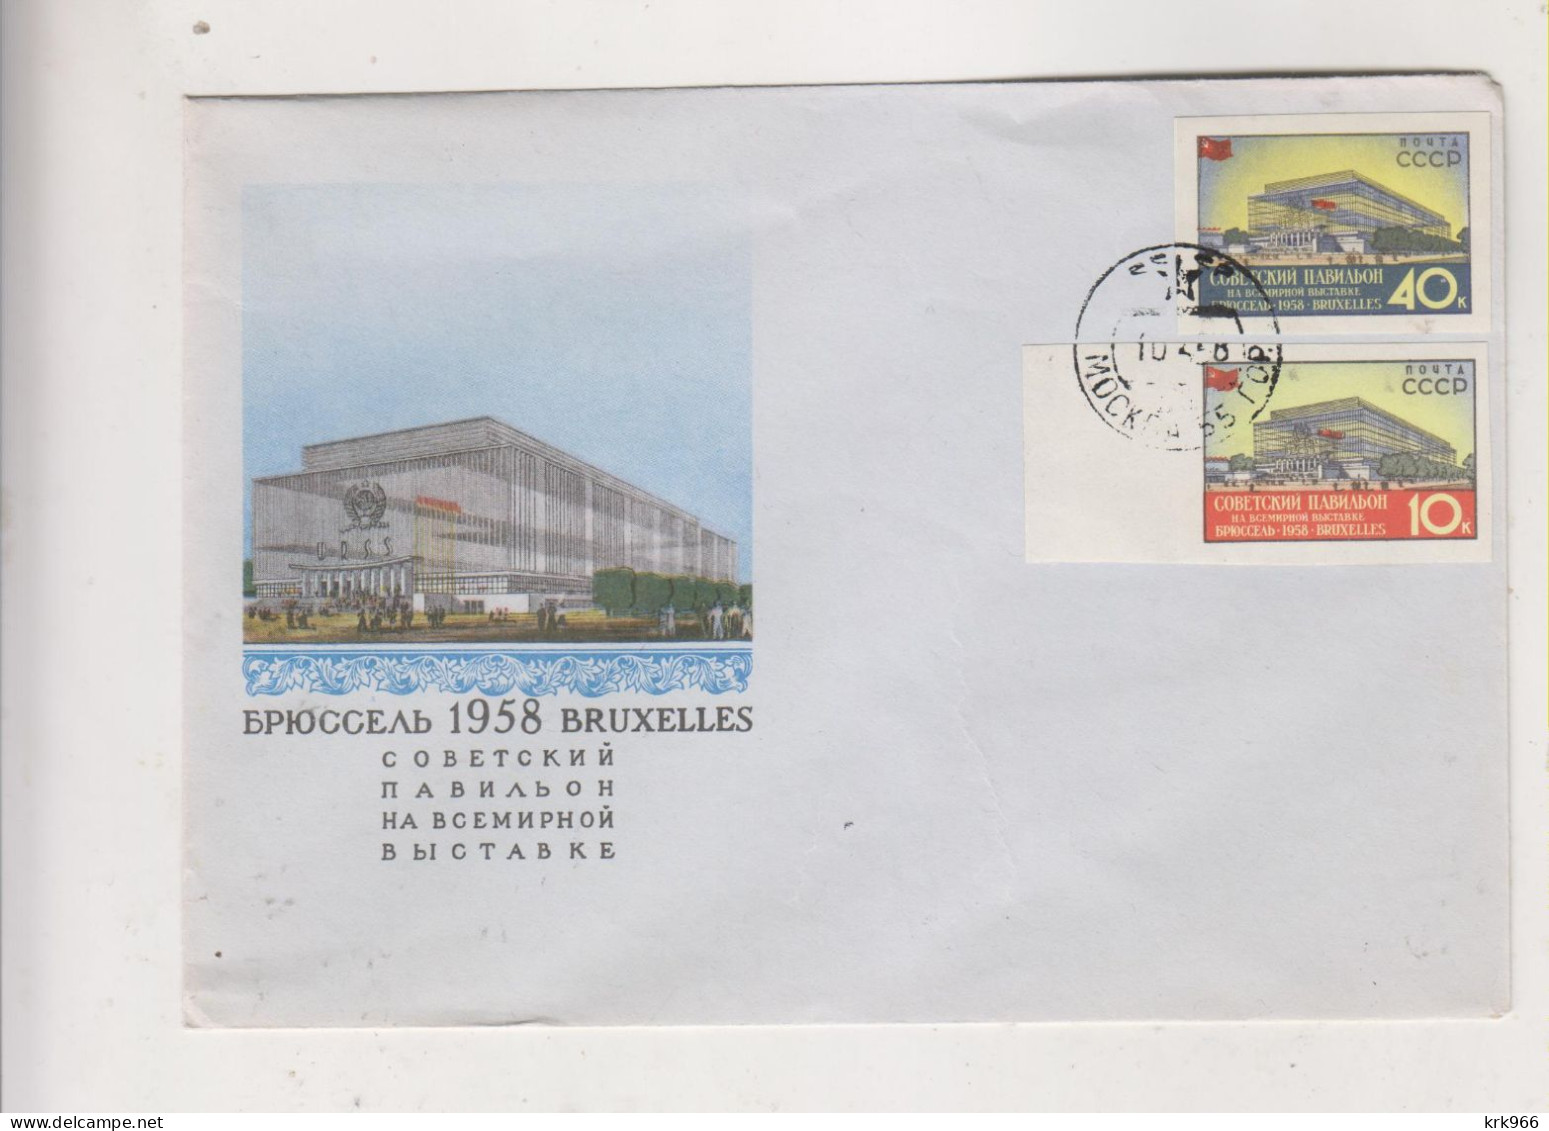 RUSSIA 1958 MOSKVA MOSCOW Nice FDC Cover BRUXELLES EXPO - Briefe U. Dokumente